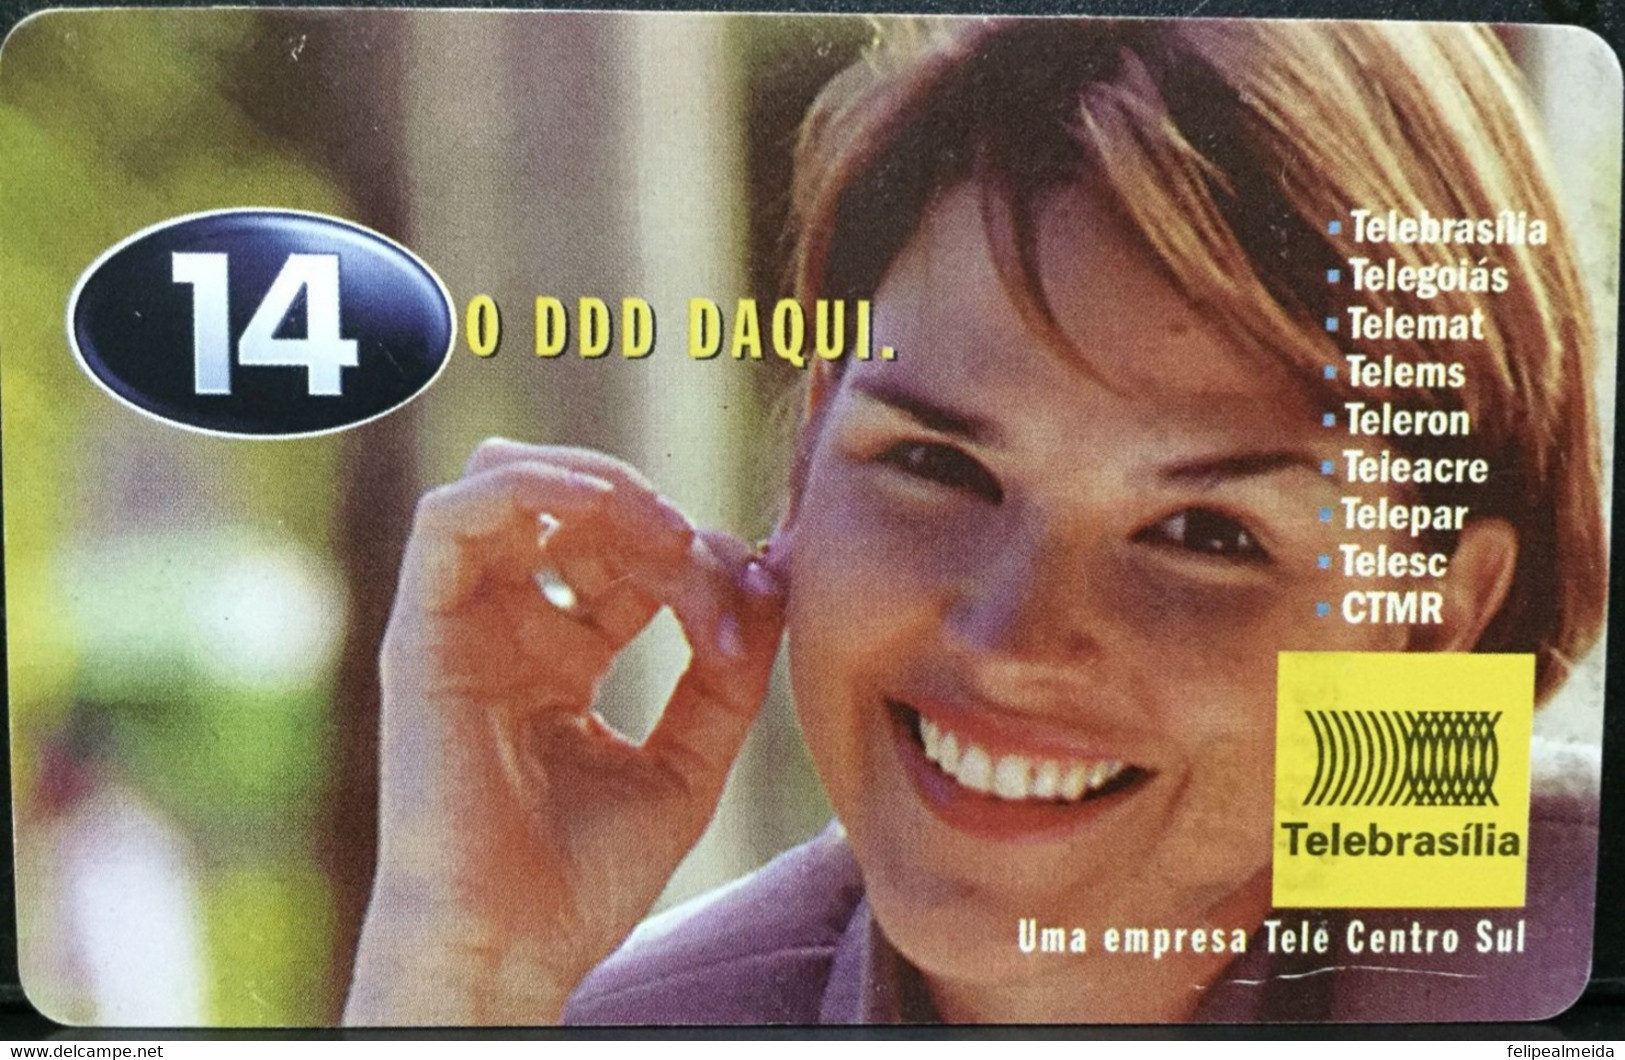 Phone Card Manufactured By Telebrasilia In 1999 - Information Card On The Use Of DDD In Calls - Operatori Telecom